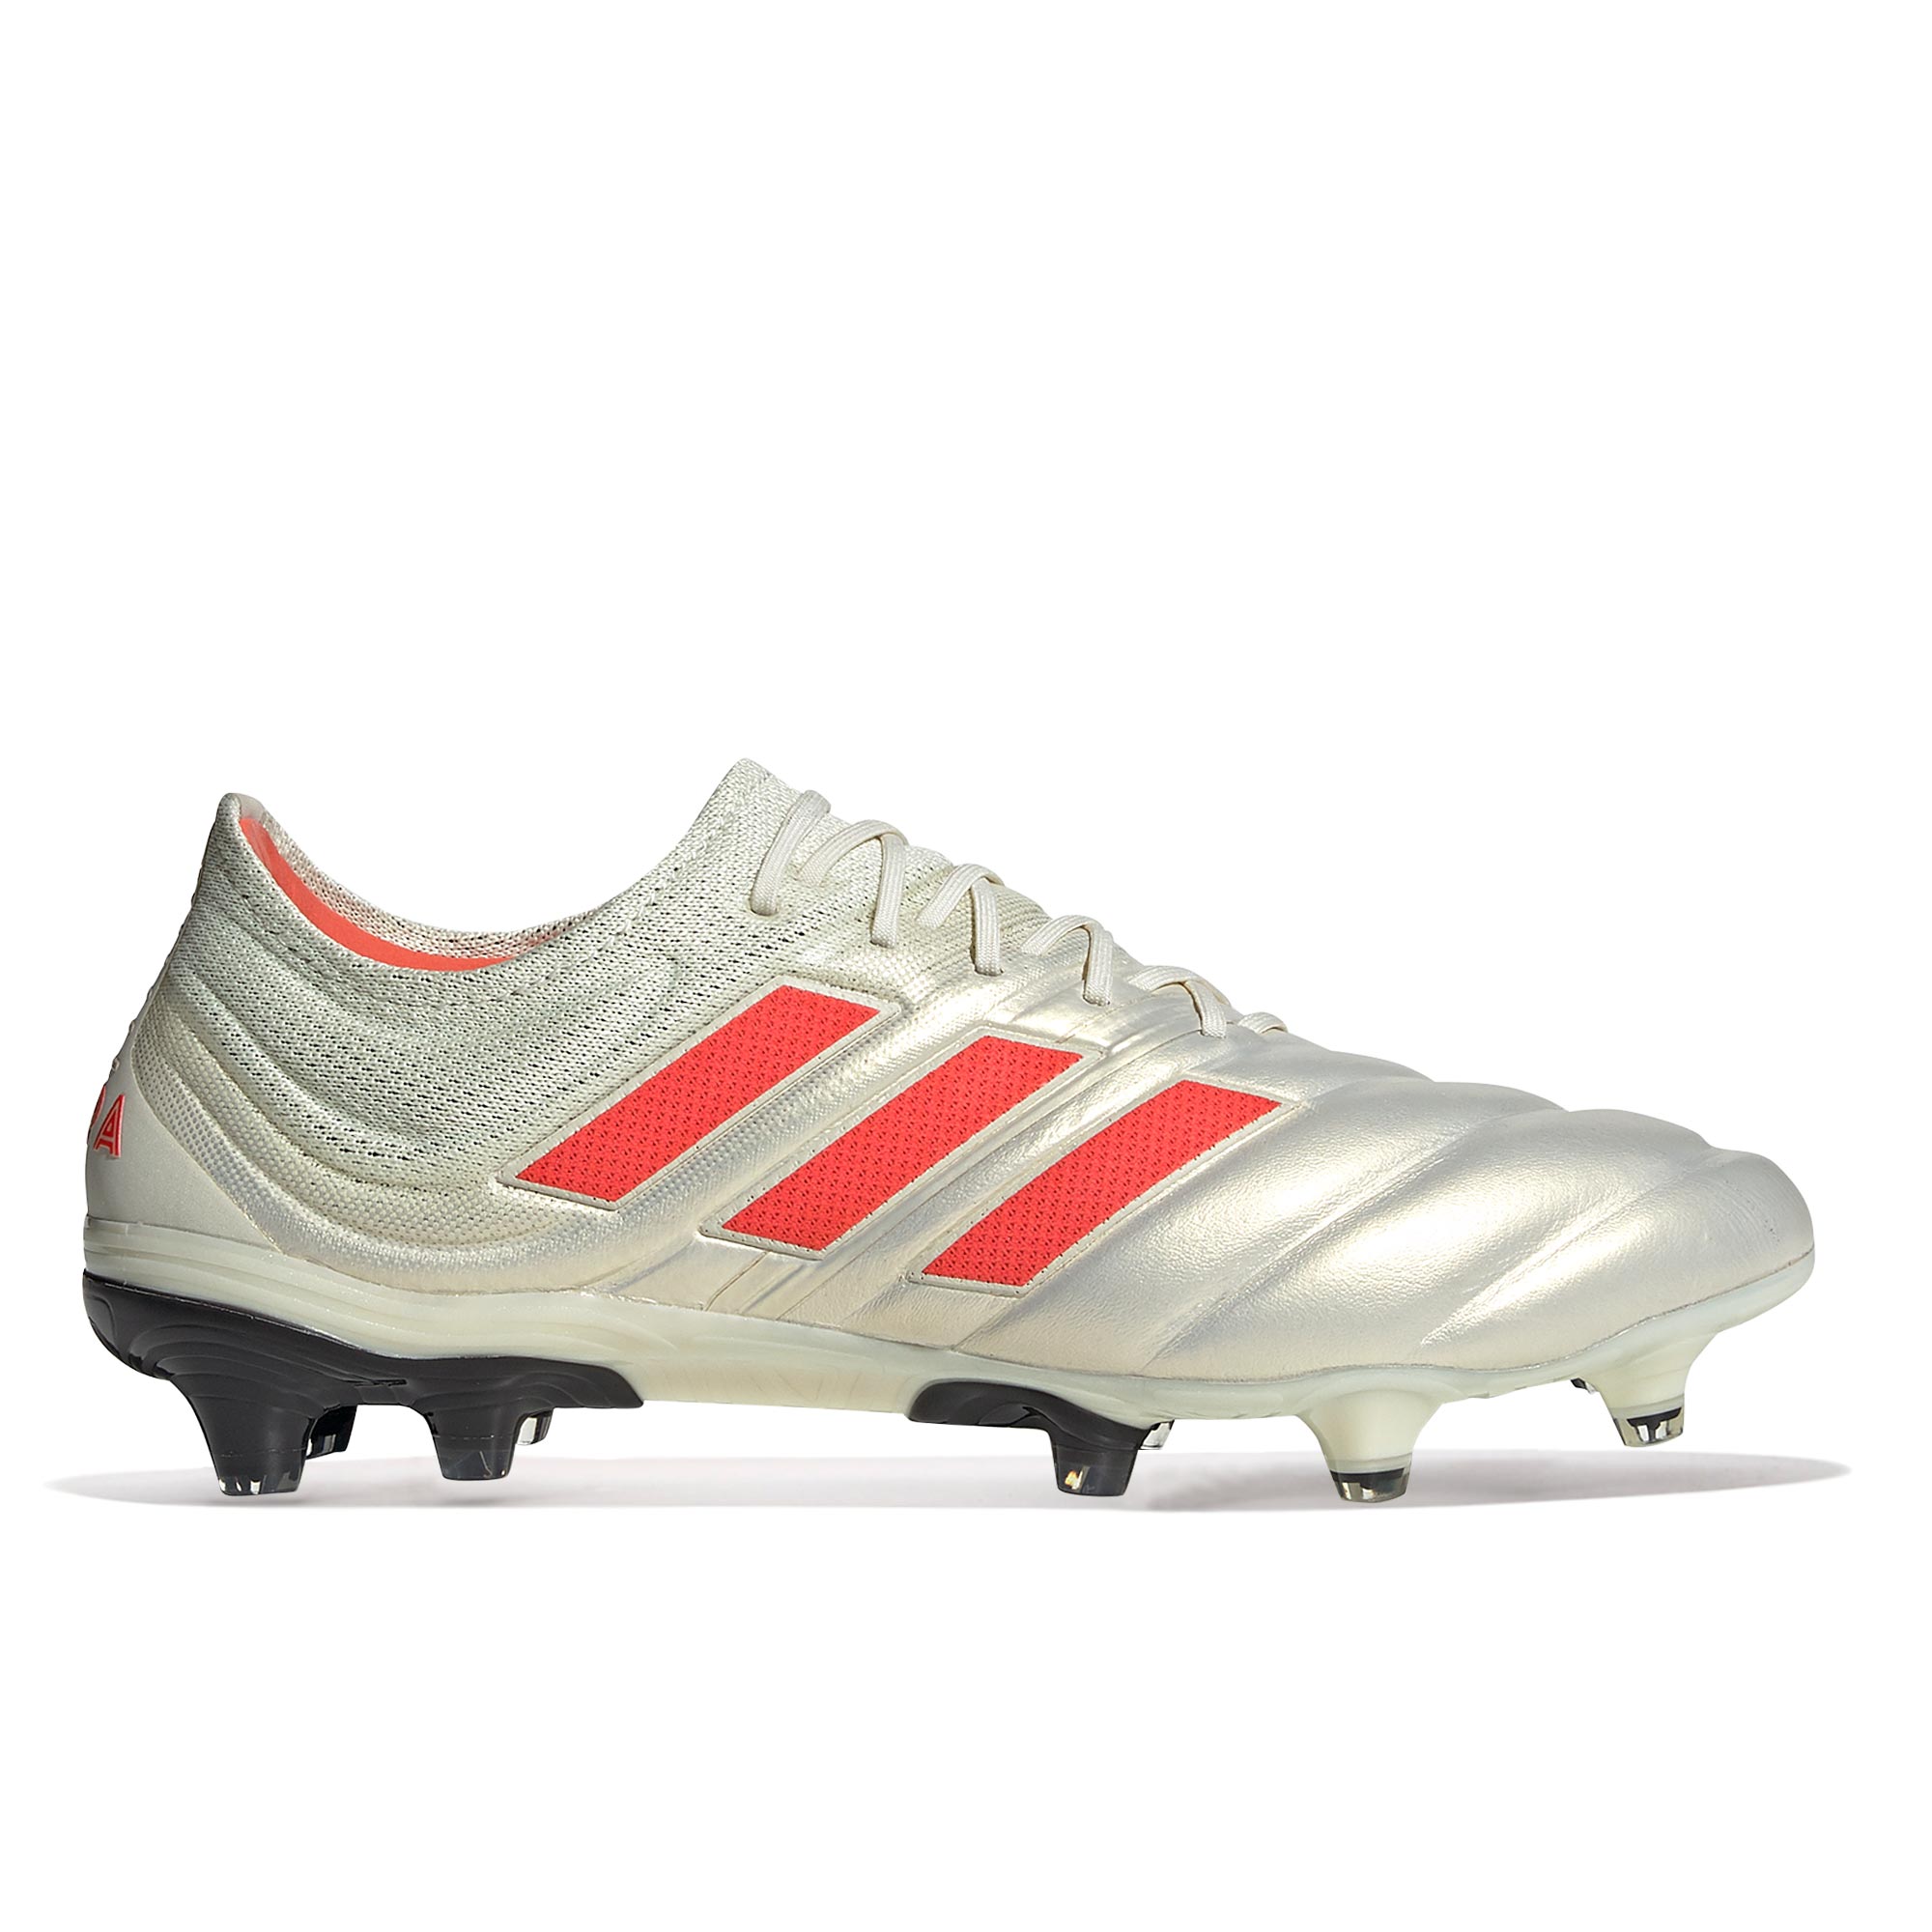 adidas Copa 19.1 FG Adults - off white/solar red/